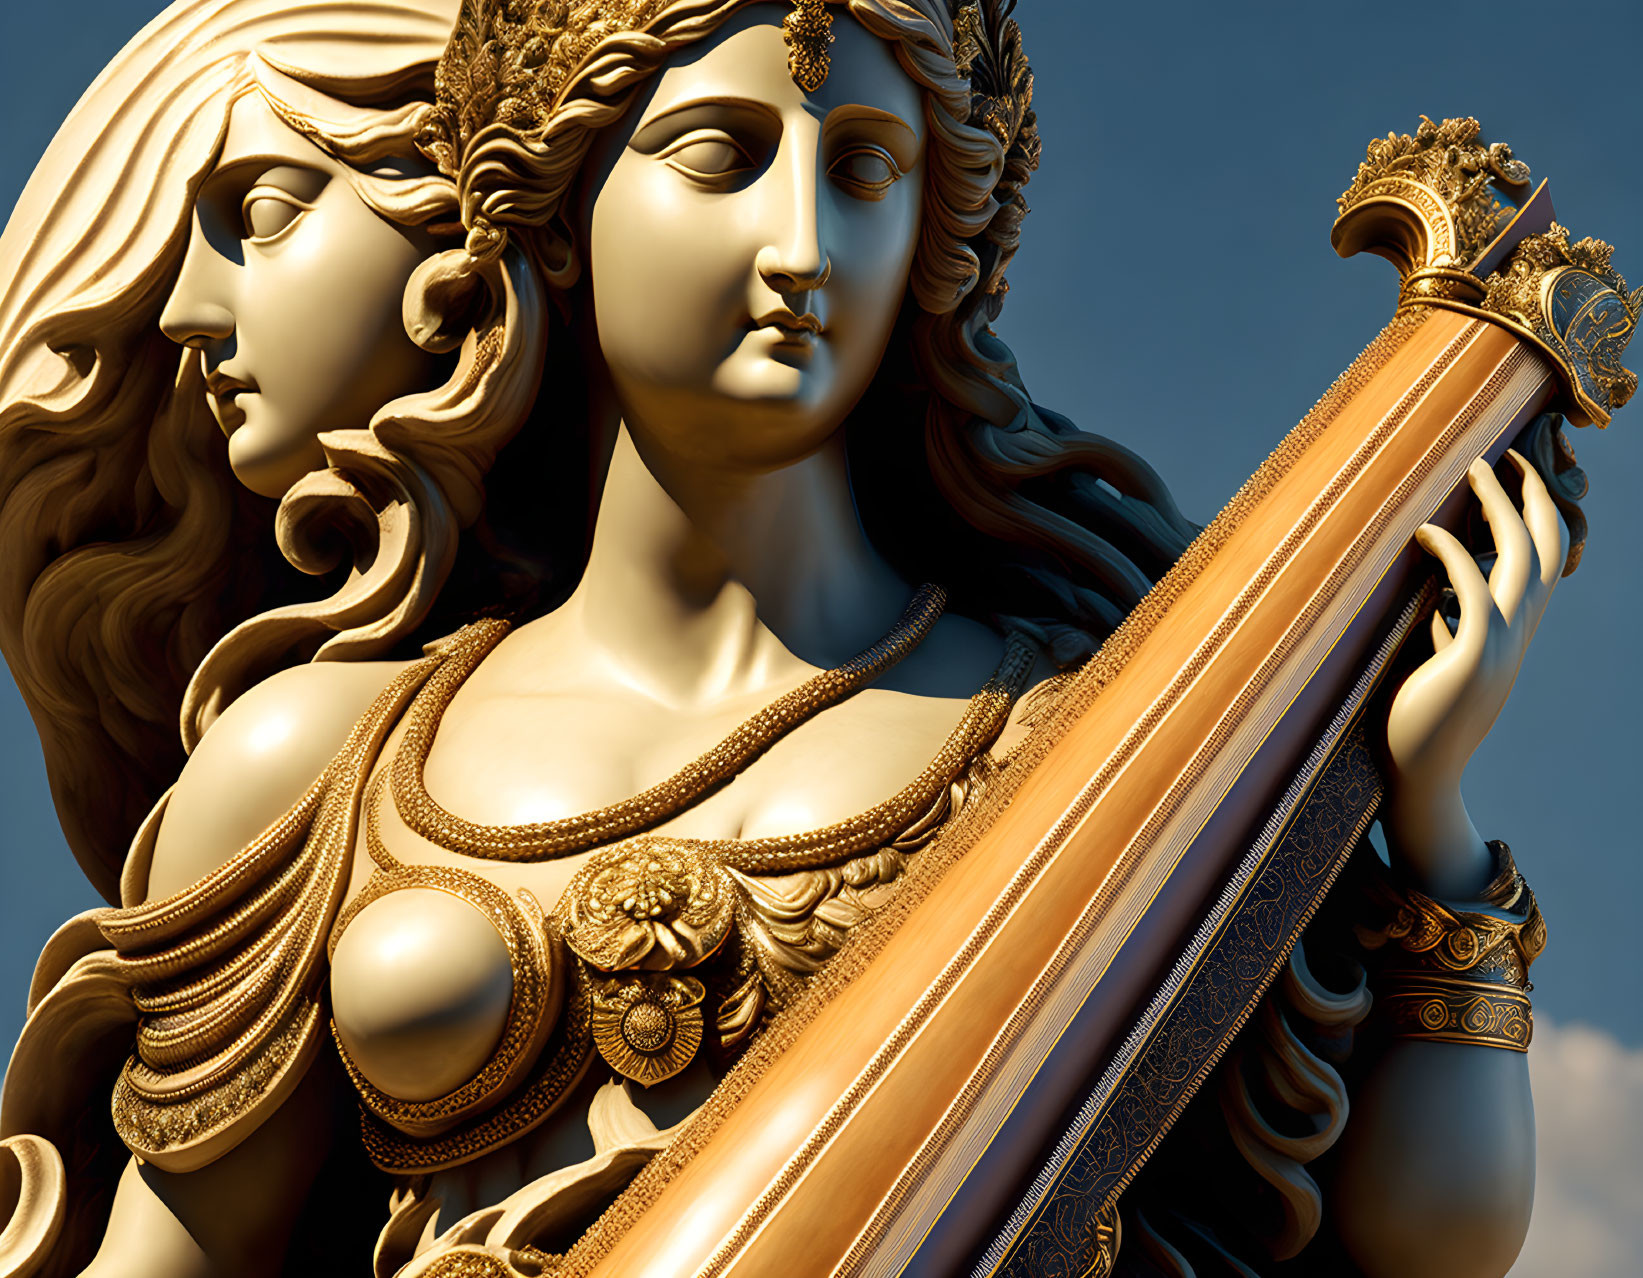 Goddess Erato with a lute